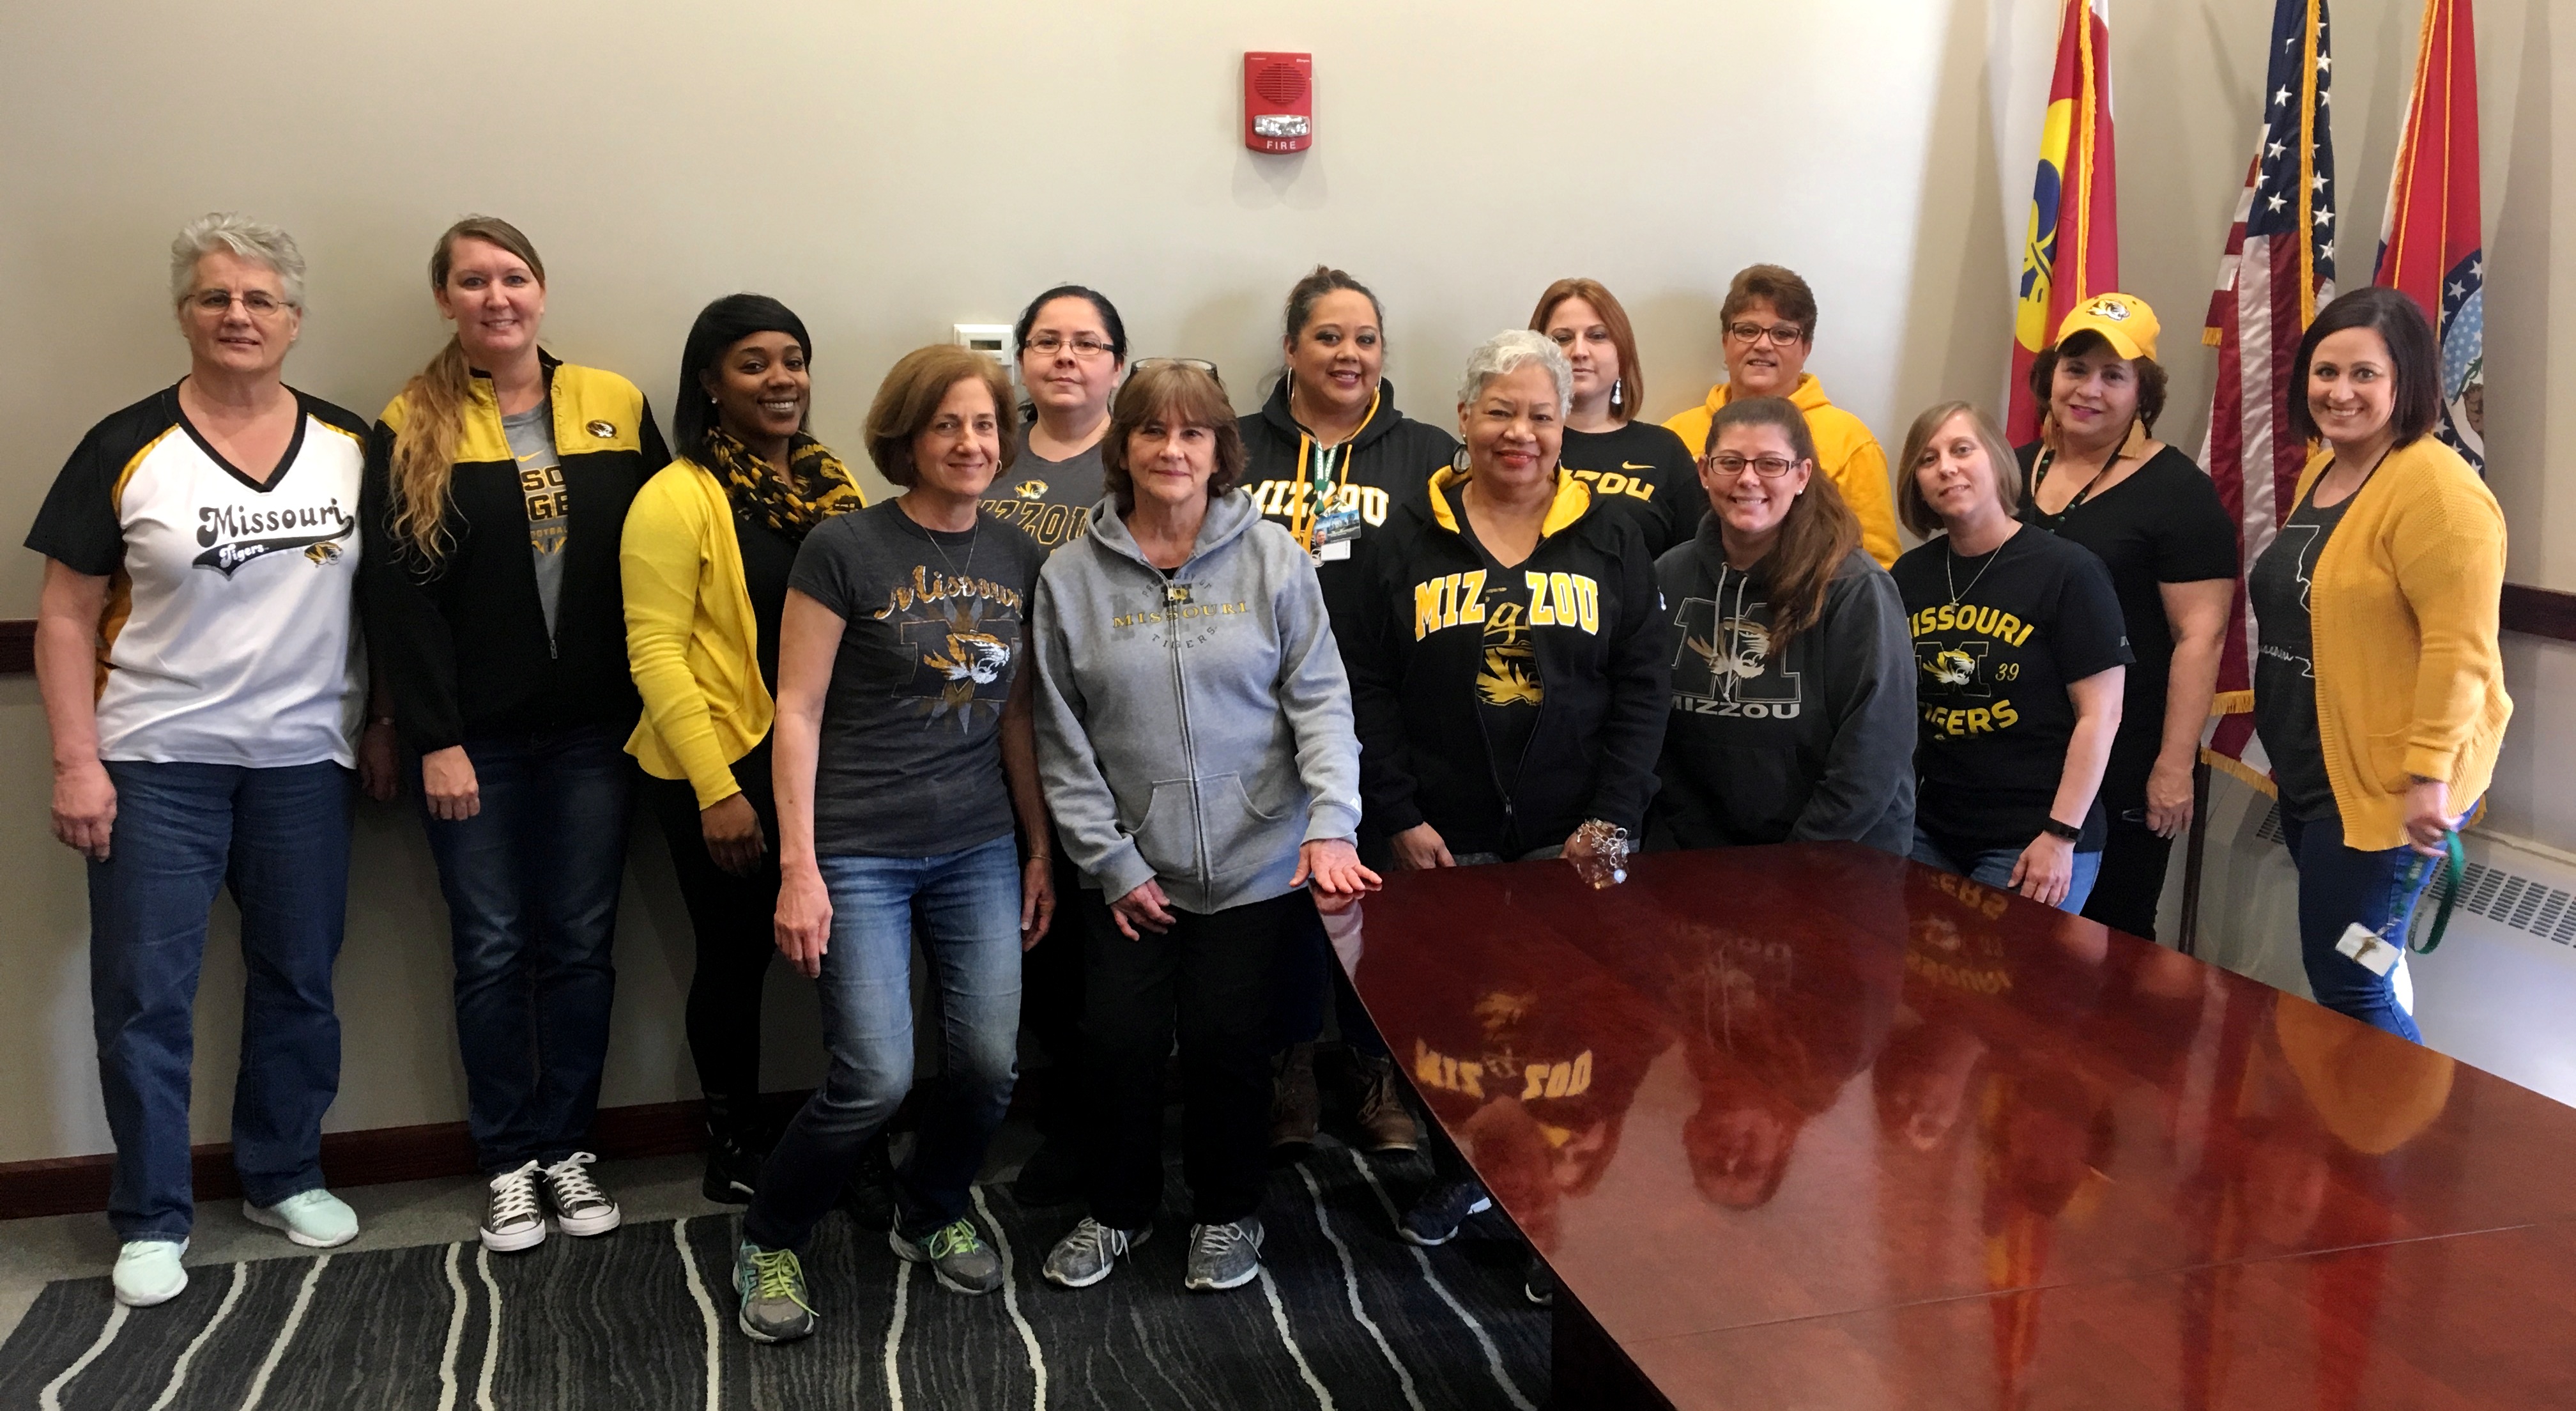 Collector of Revenue employees celebrated 2018 Arch Madness by wearing Mizzou Black and Gold